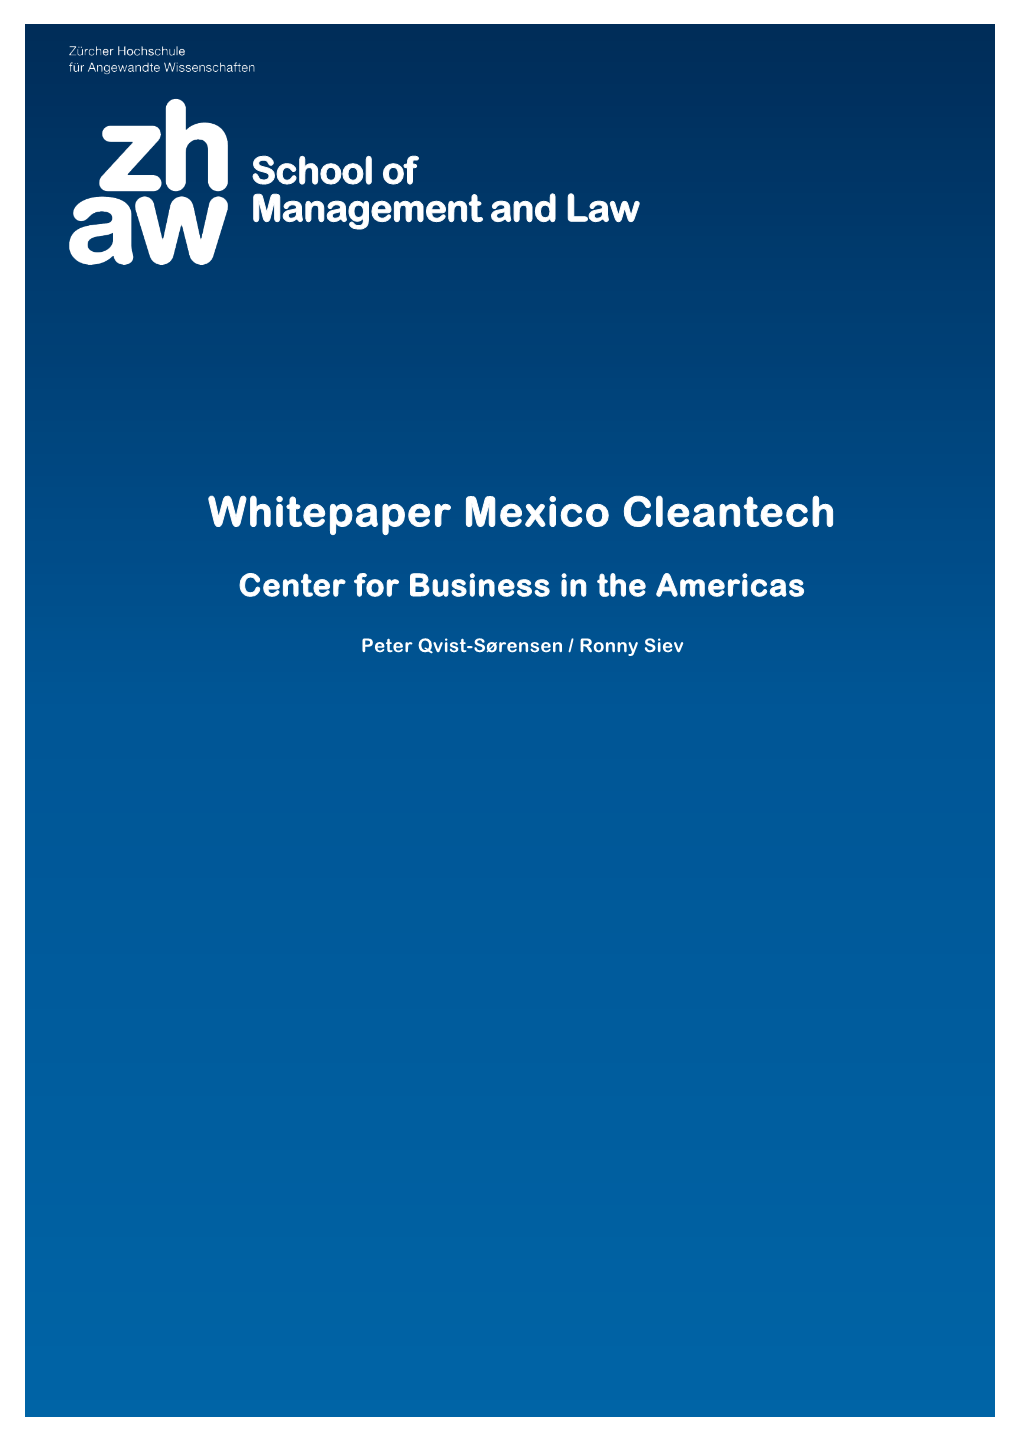 Whitepaper Mexico Cleantech